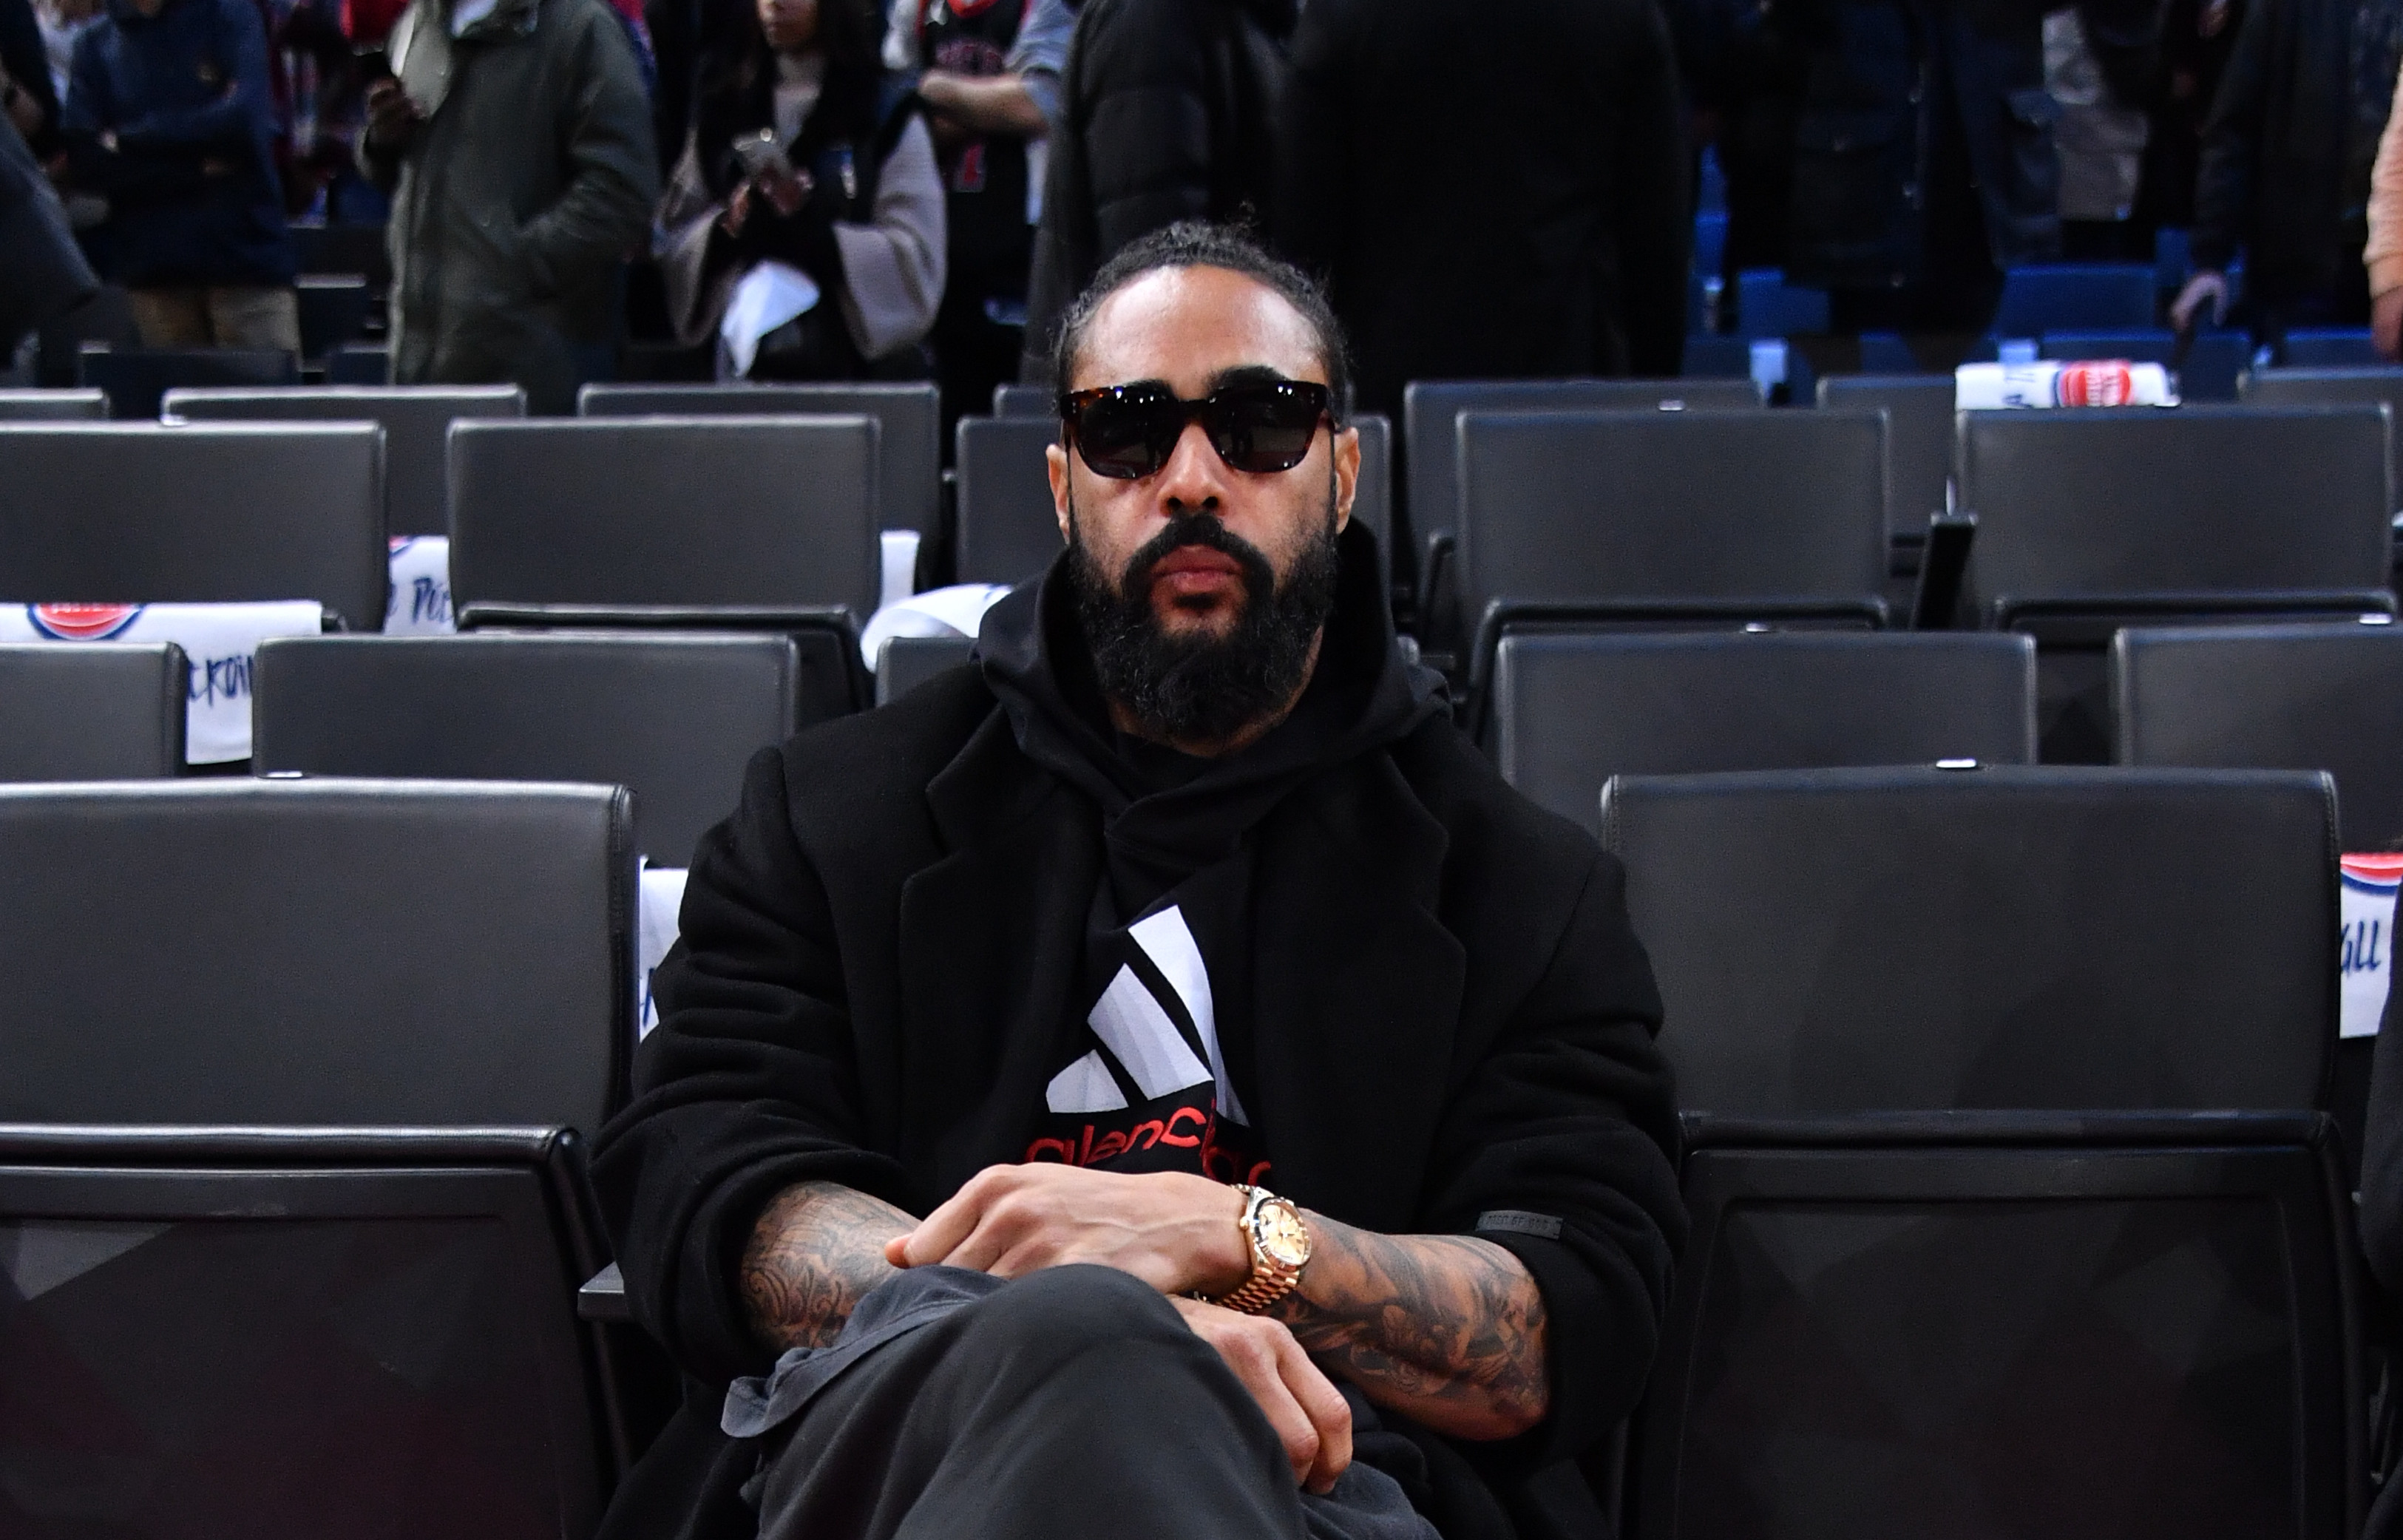 What makes Jerry Lorenzo's style so alluring is his ability to